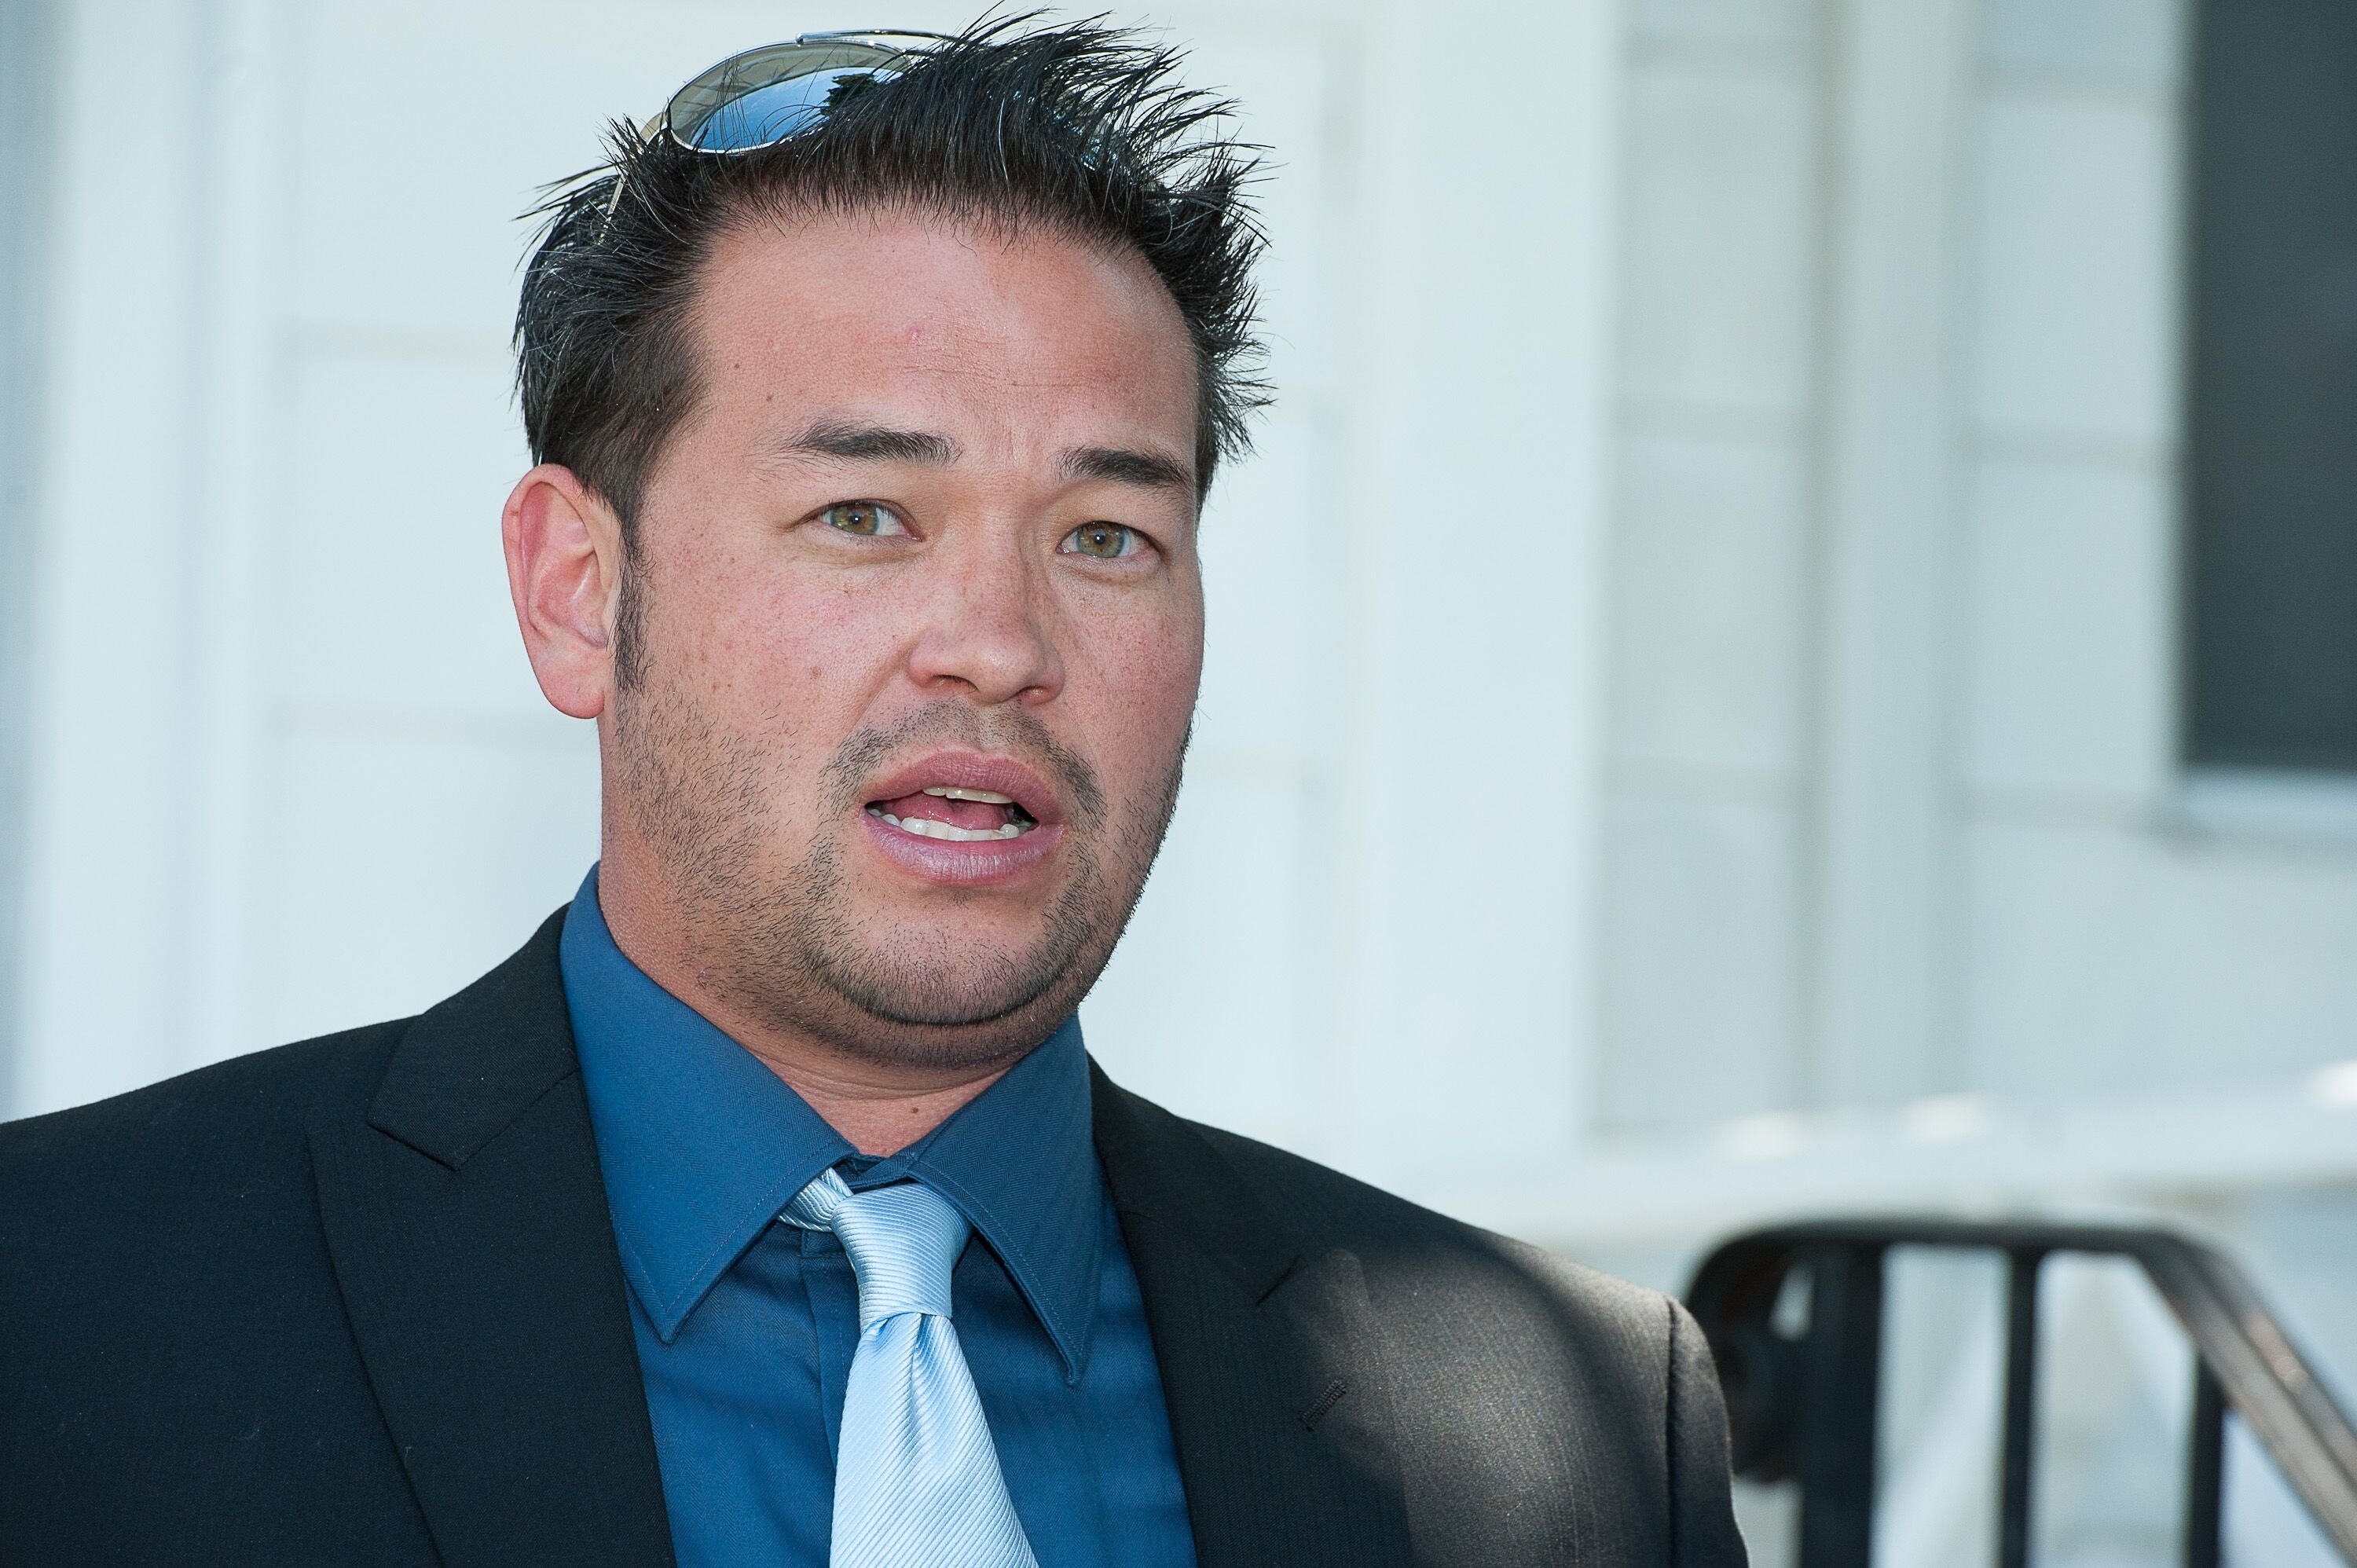  Jon Gosselin attends a press conference on Tax Deductible Marriage Counseling at Bergen Marriage Counseling & Psychotherapy on June 27, 2012 | Photo: Getty Images